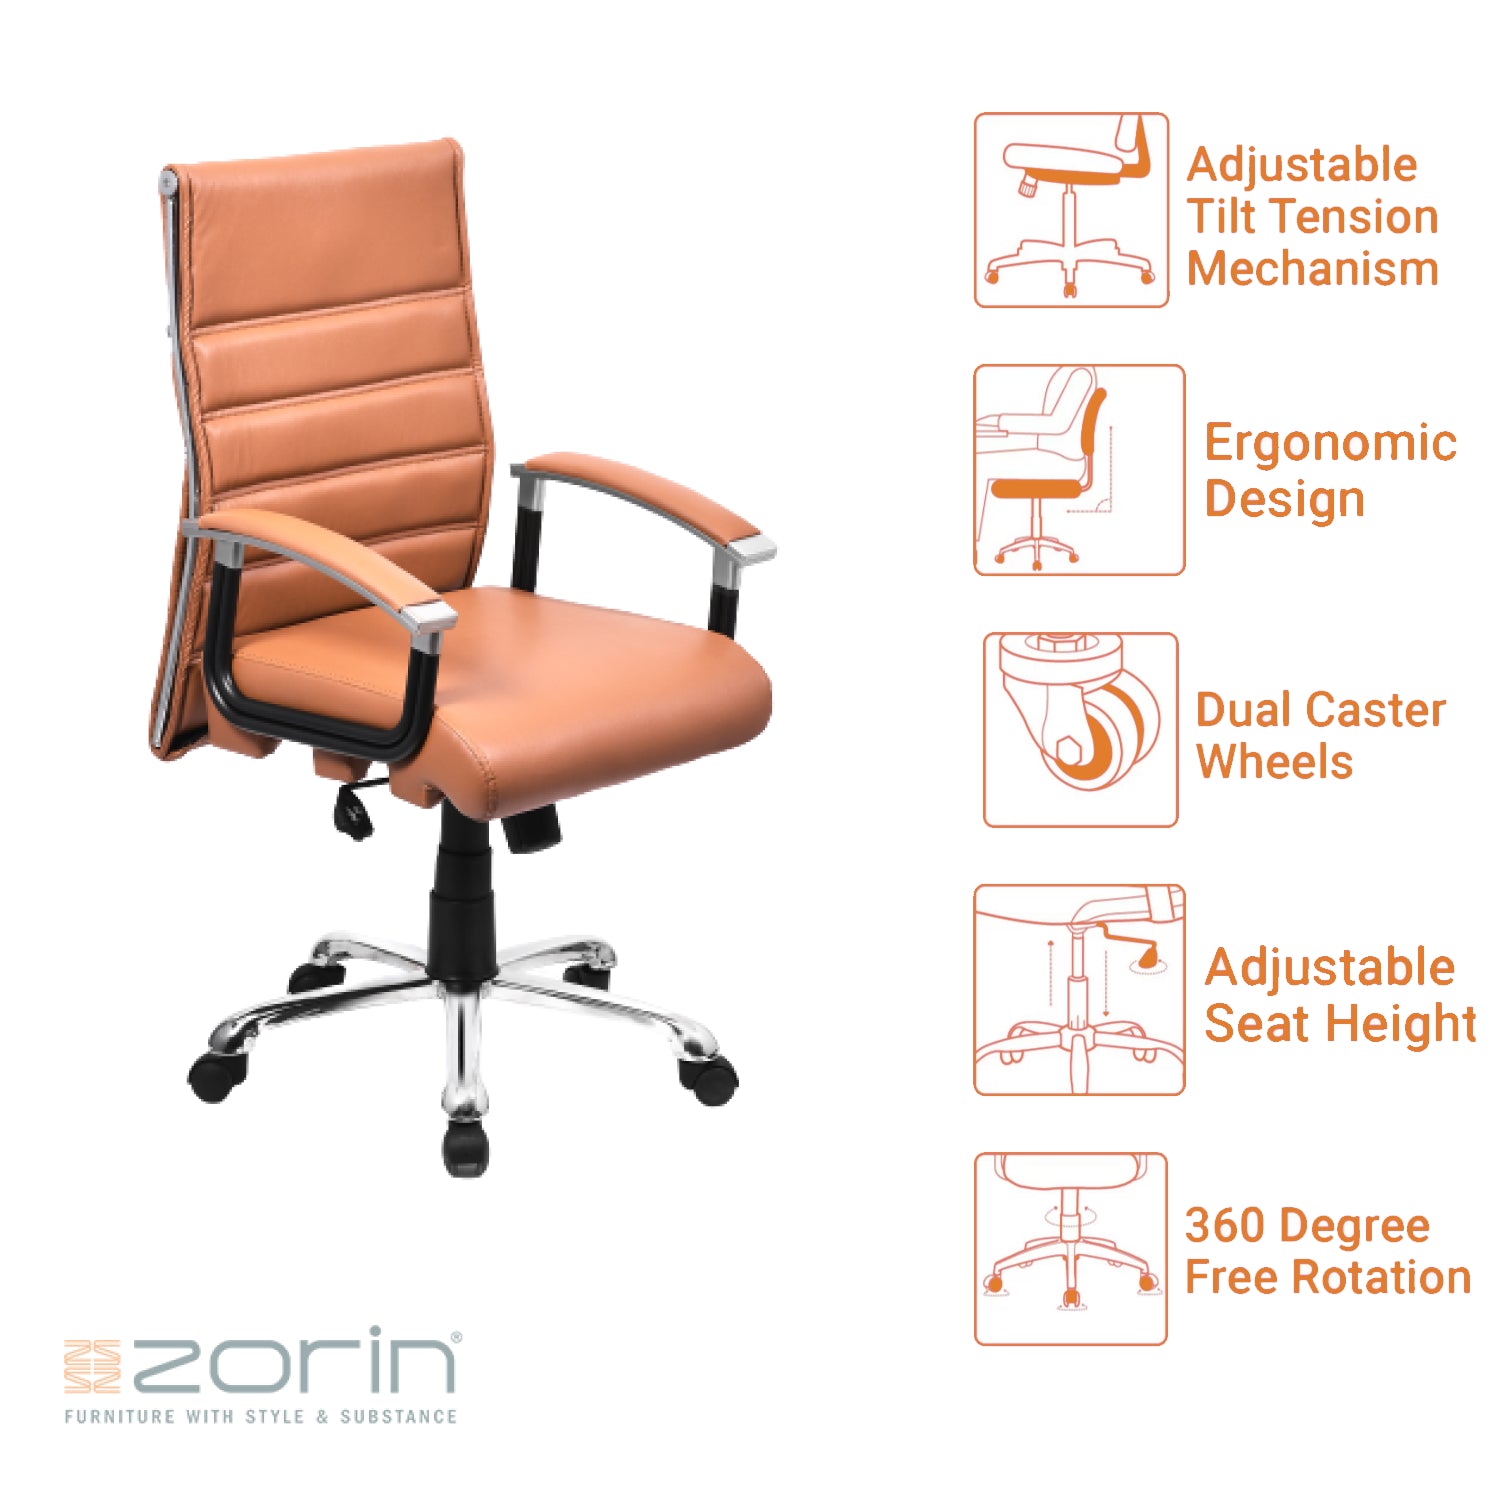 ZSE1035 Medium Back Chair by Zorin in Tan Color Zorin